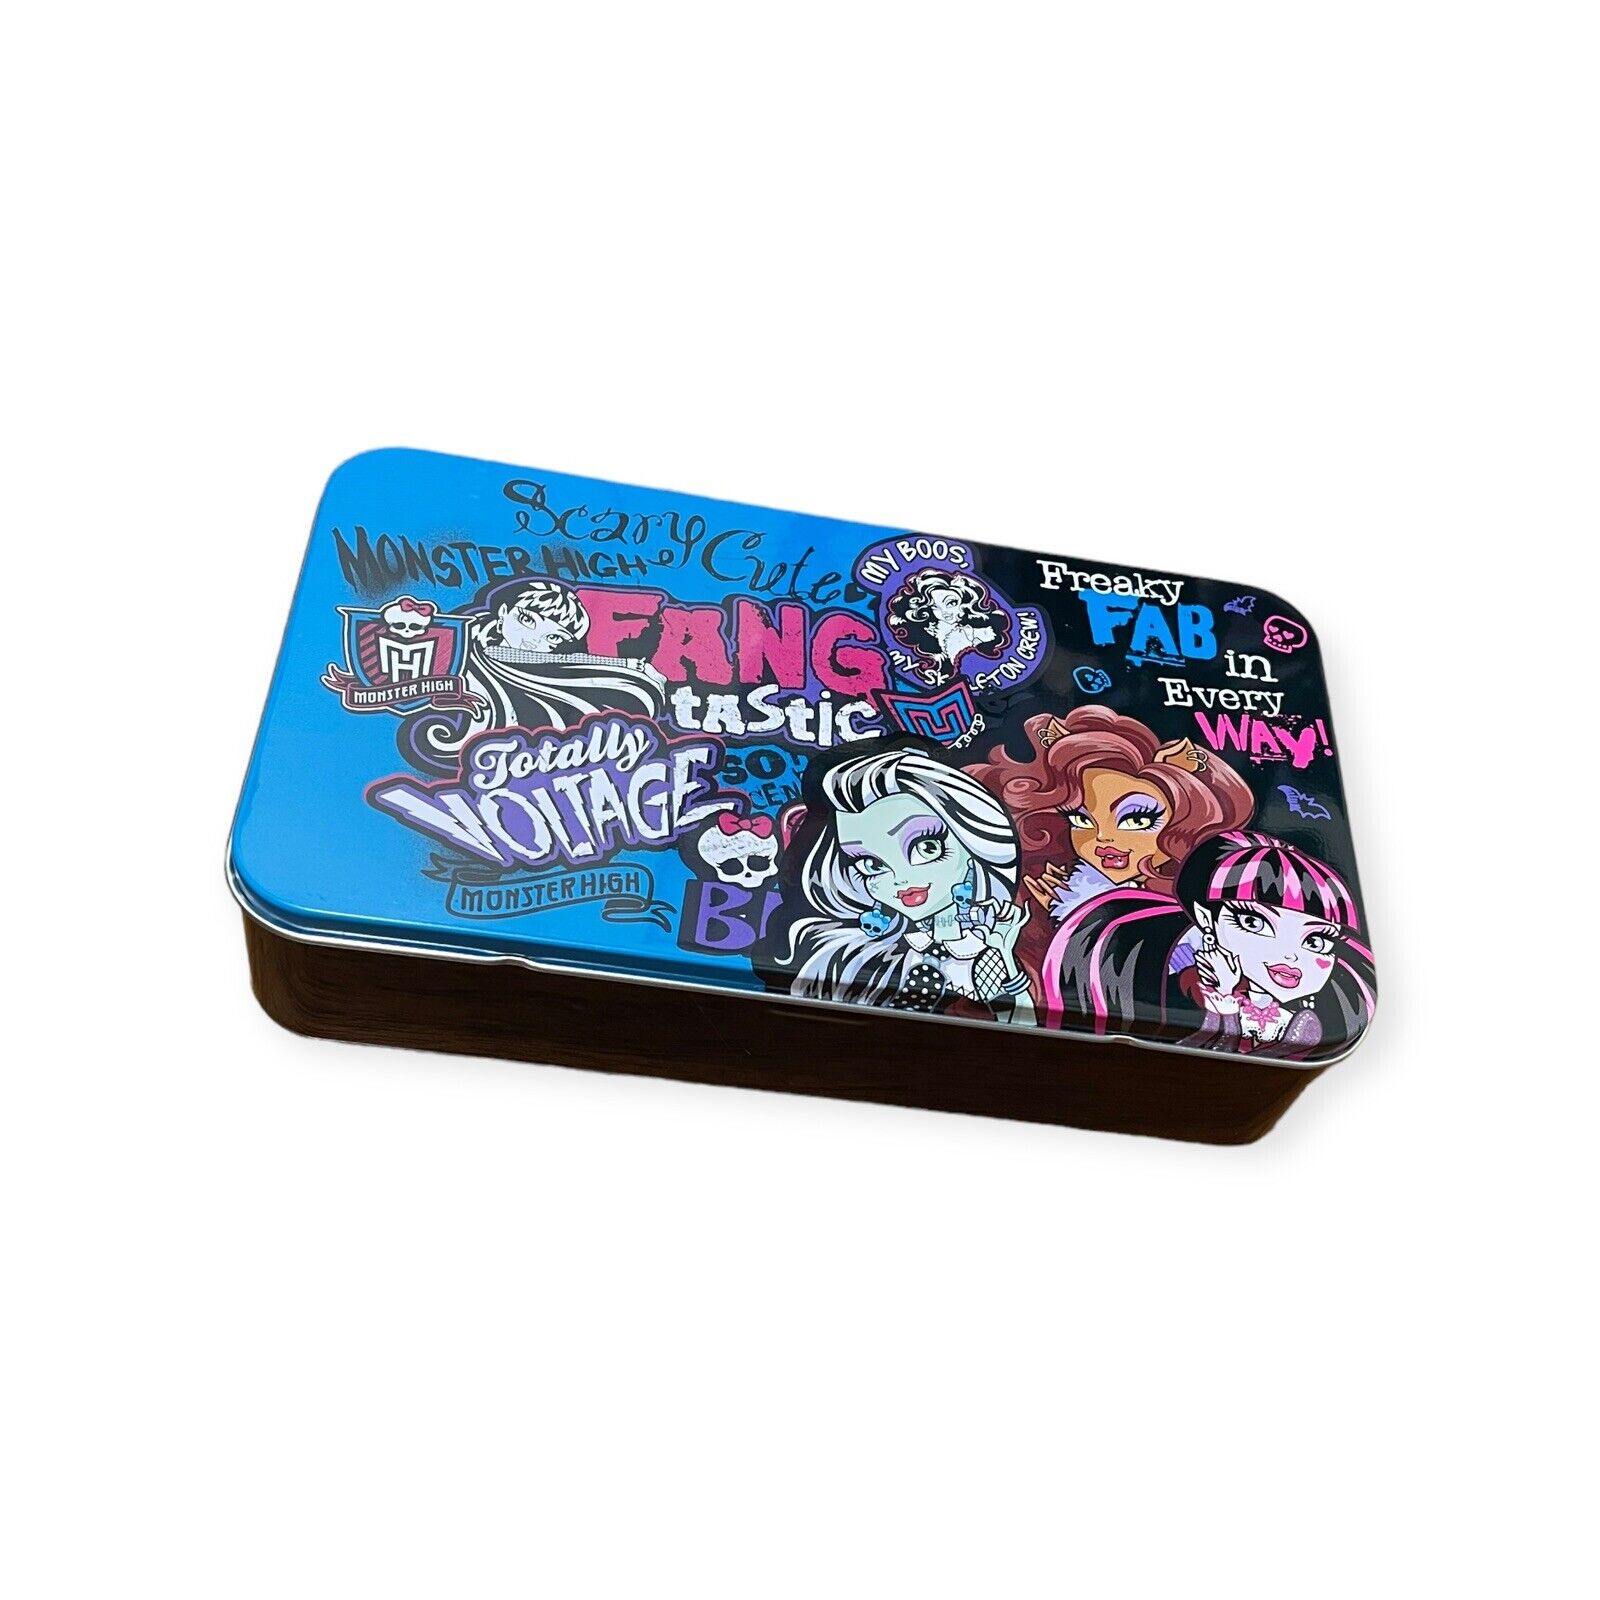 Monster High 2014 Tin Metal Pencil Box Container Storage Rectangular Freaky Fab